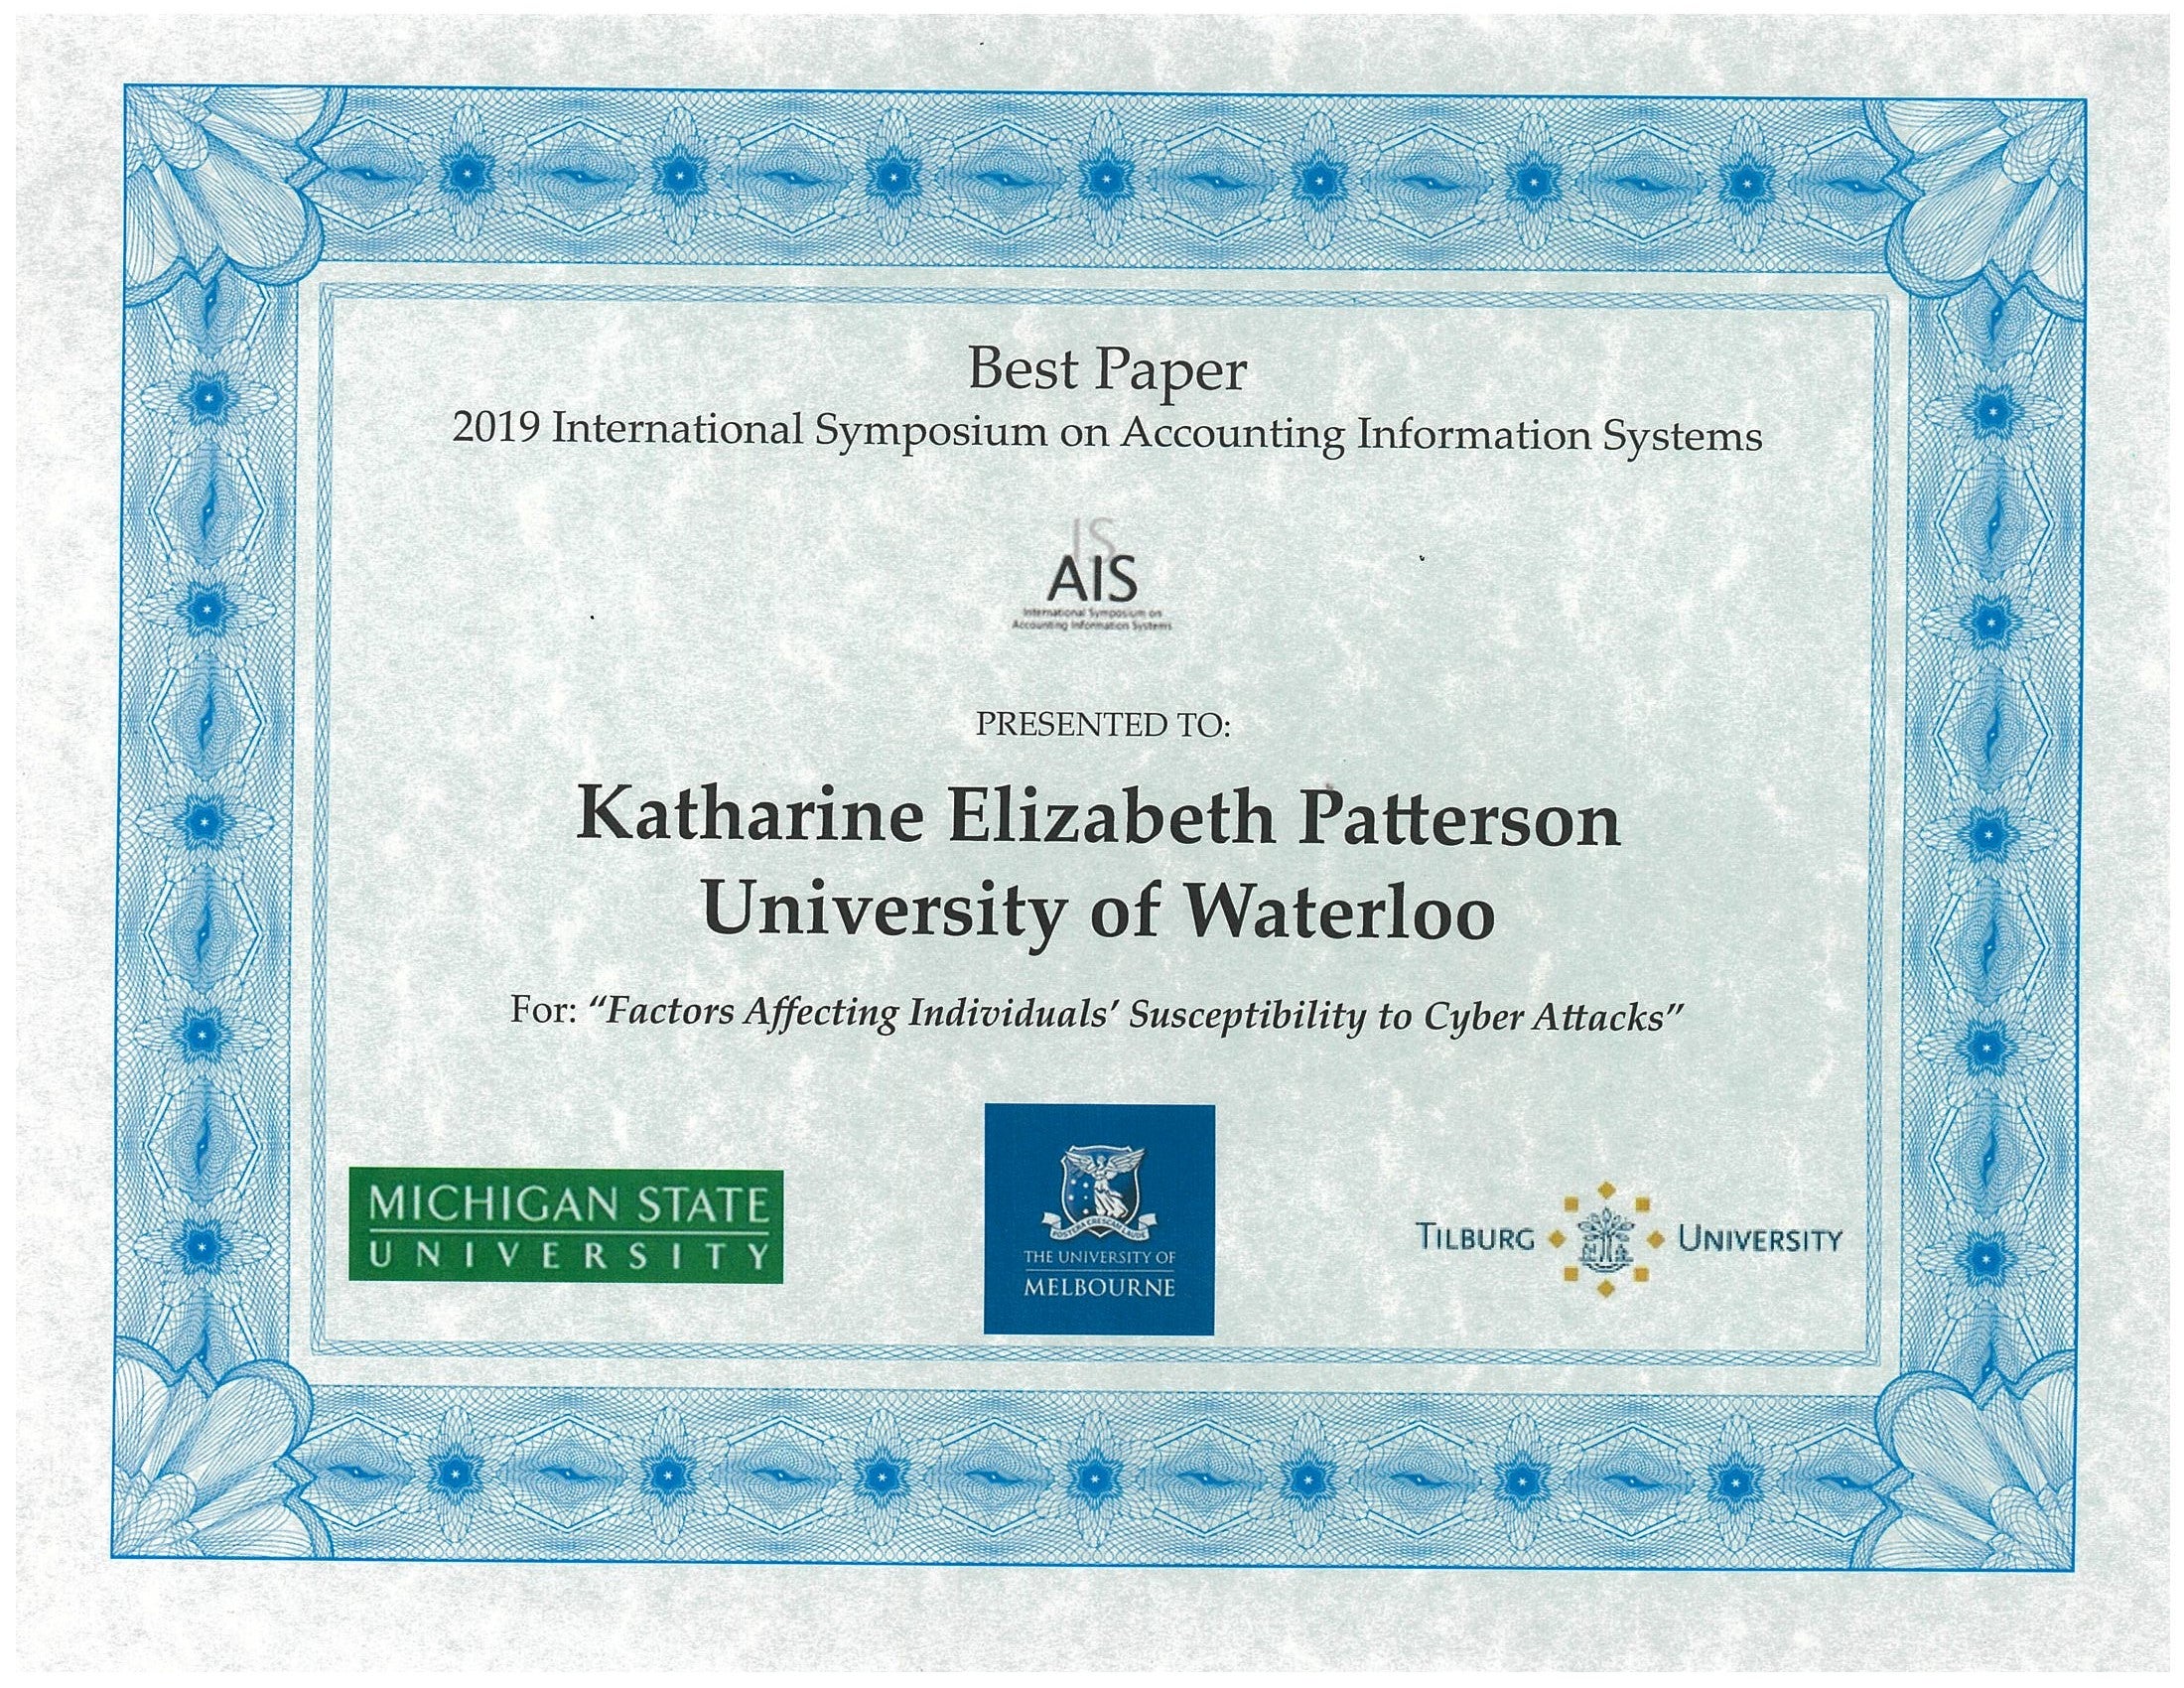 best paper award Kate Patterson